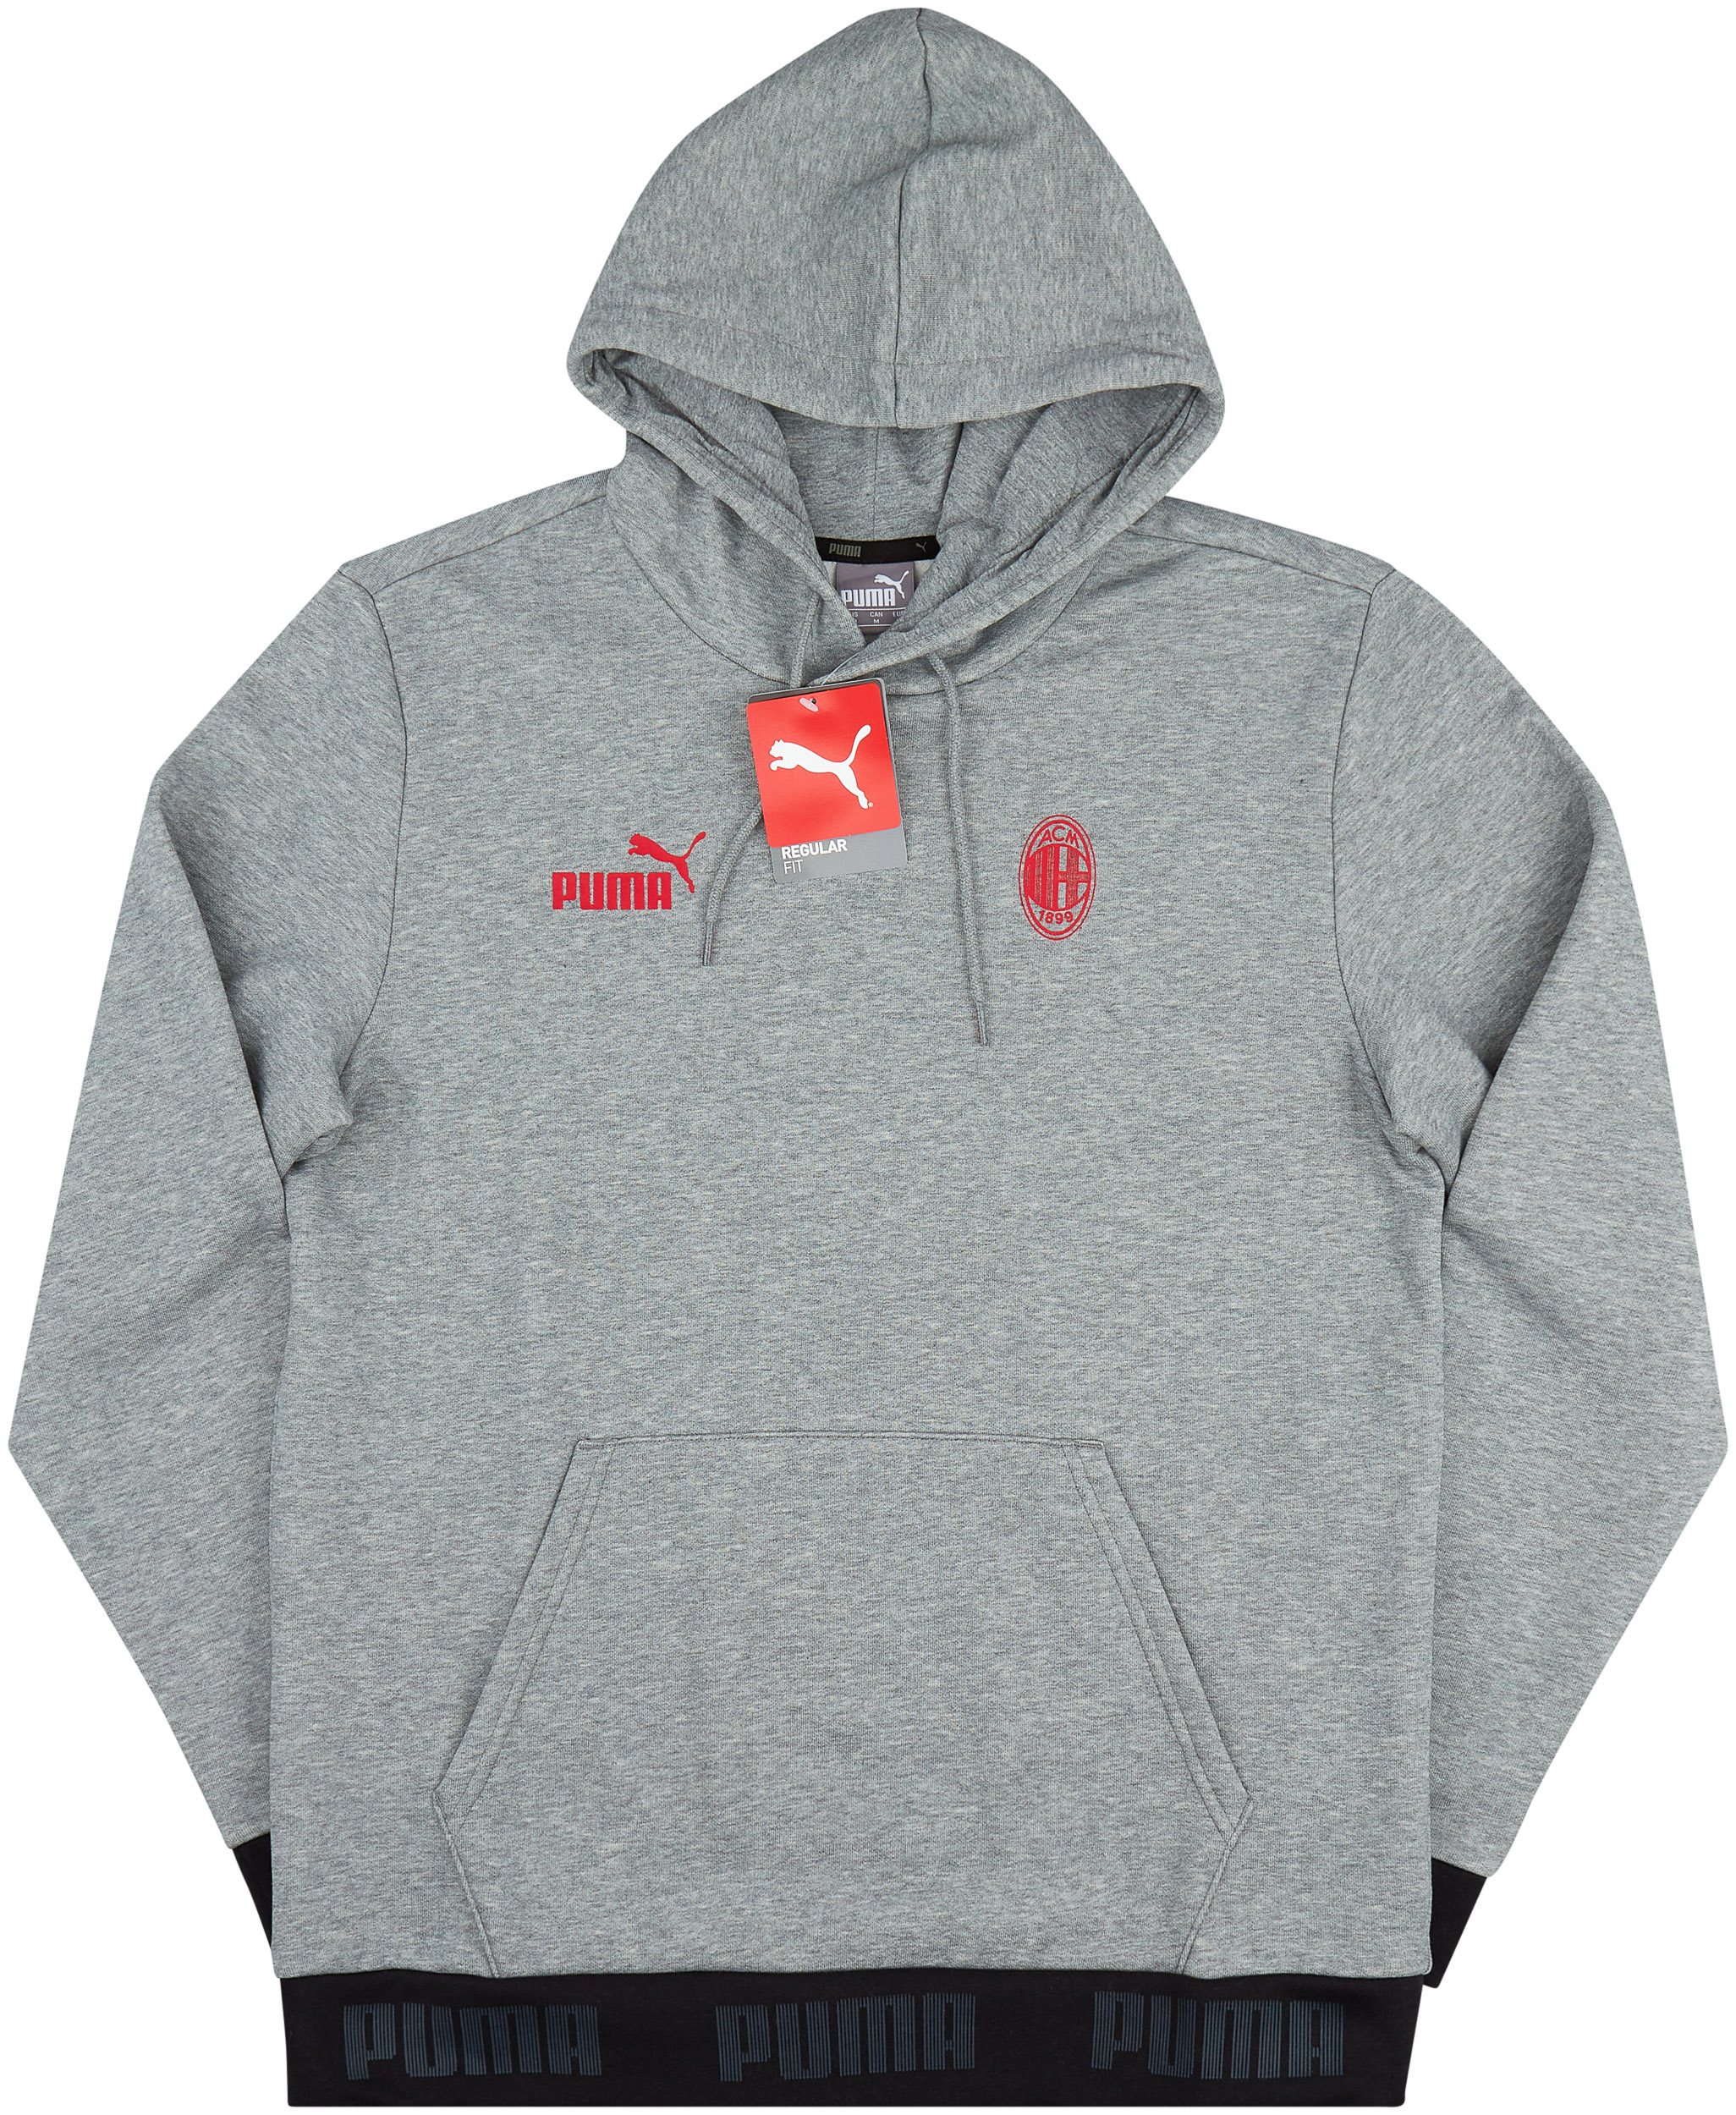 2019-20 AC Milan Puma FtblCulture Hooded Top - NEW - (M)